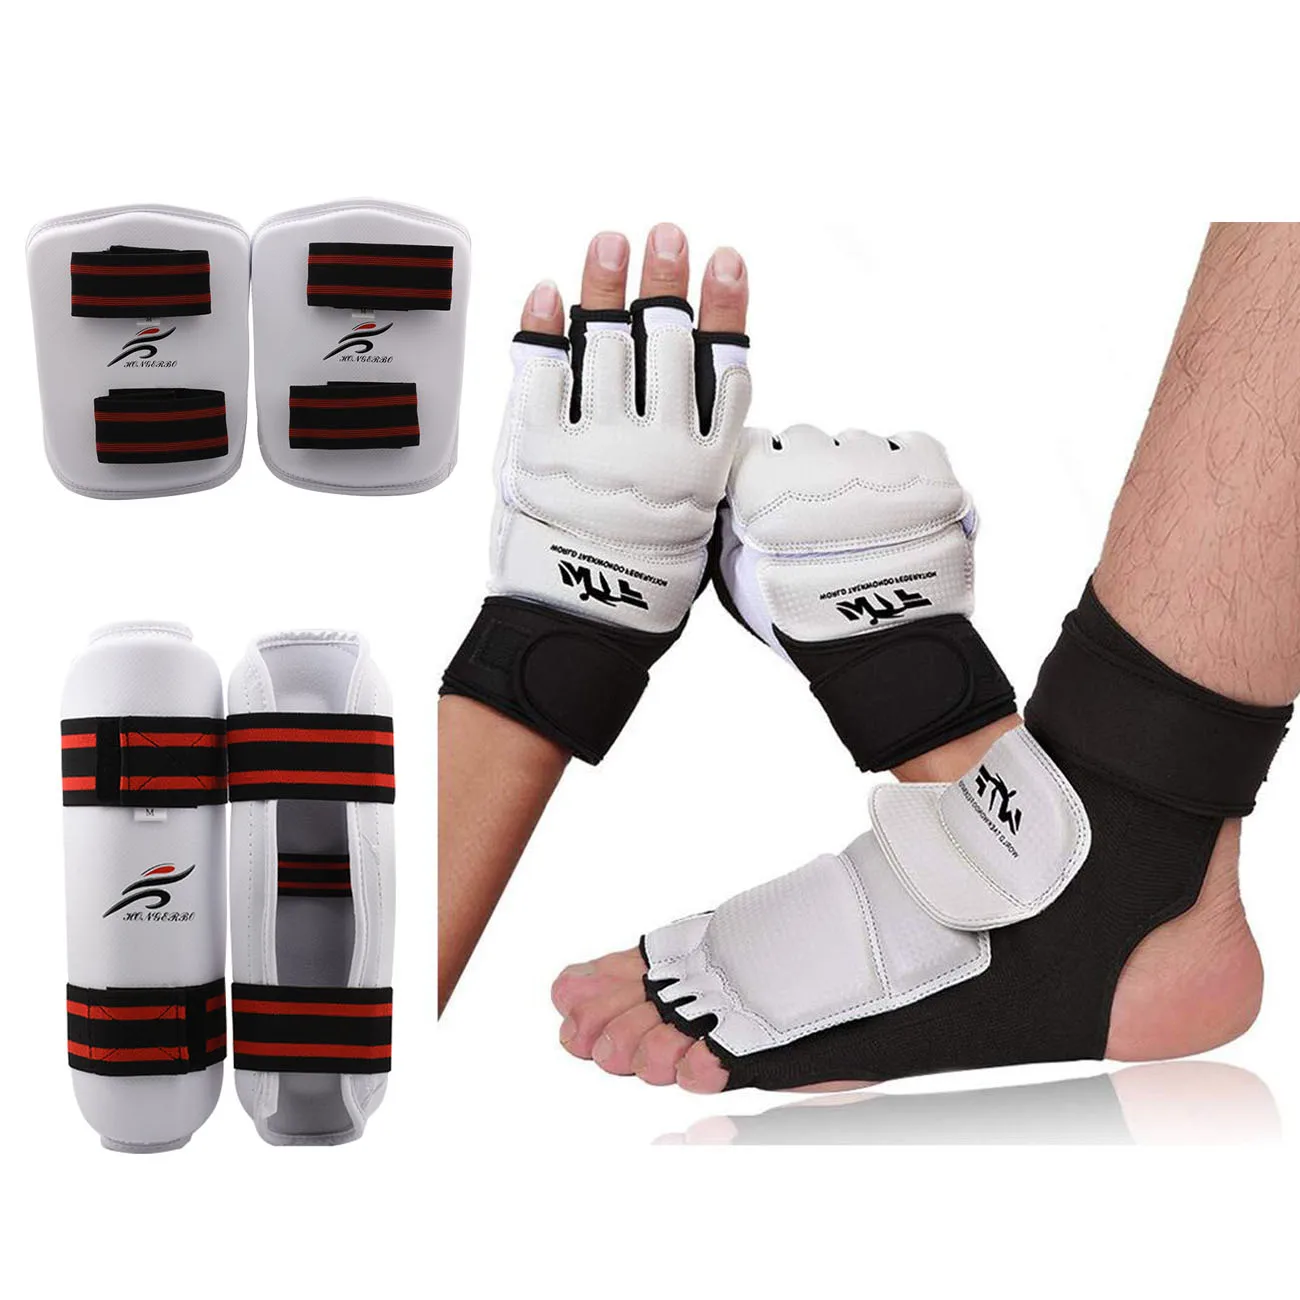 https://ae01.alicdn.com/kf/Scea55be797c5474a85c25b10be8b40839/Taekwondo-Shoes-Foot-Socks-Adults-Child-Professional-Hand-Finger-Palm-Protection-Boxing-Karate-Gloves-Martial-Arts.jpg